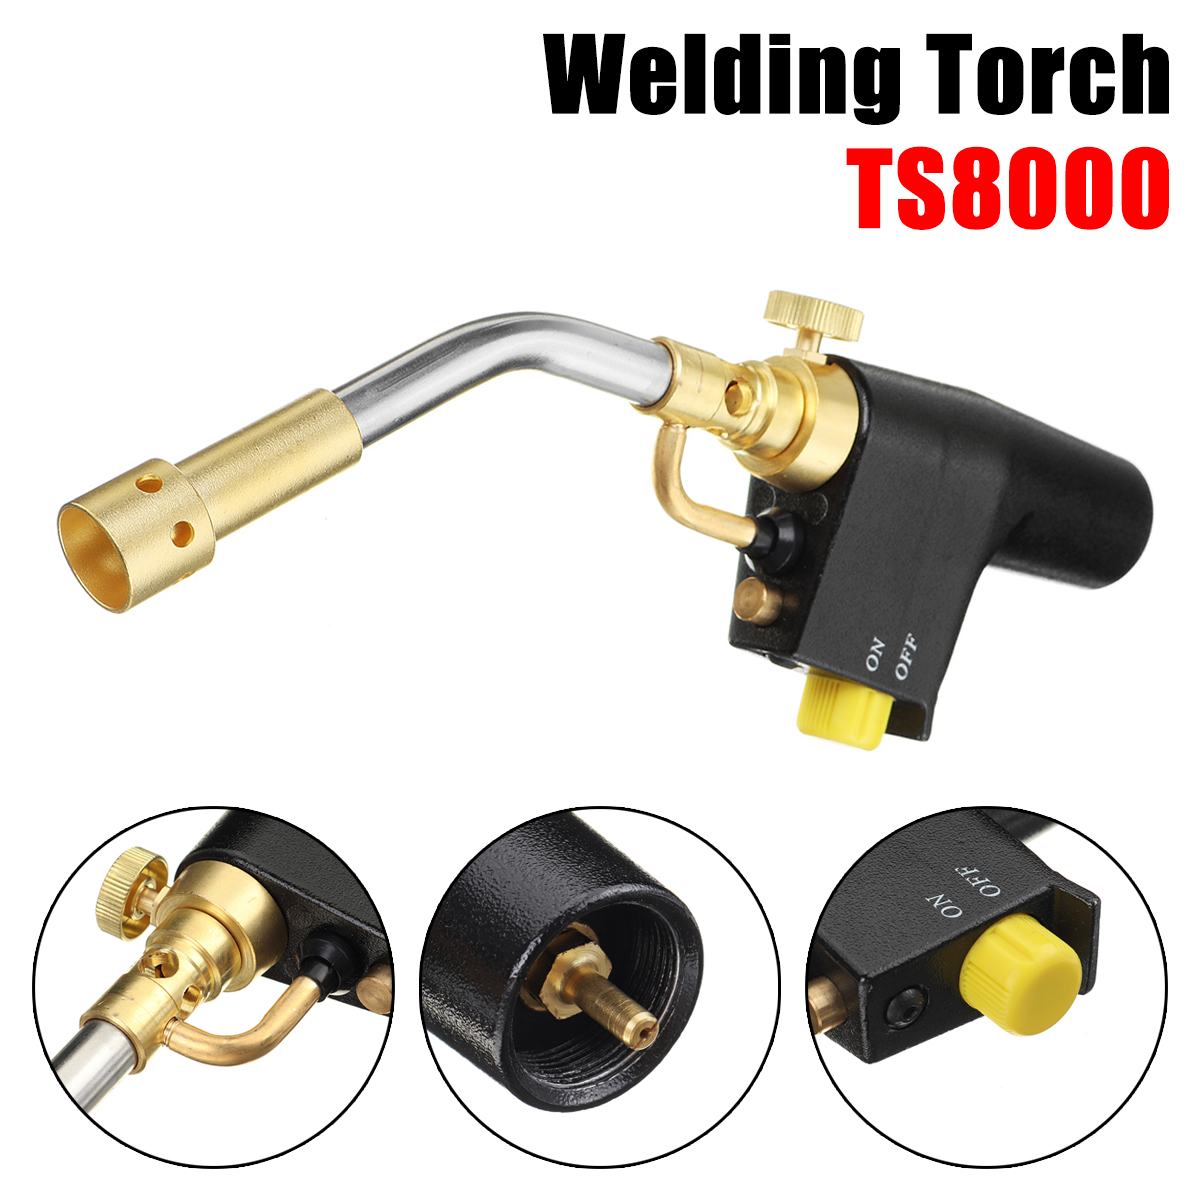 TS8000-Type-High-Temperature-Brass-Mapp-Gas-Torch-Propane-Welding-Pipe-With-a-Replaceable-Brass-Weld-1717065-1